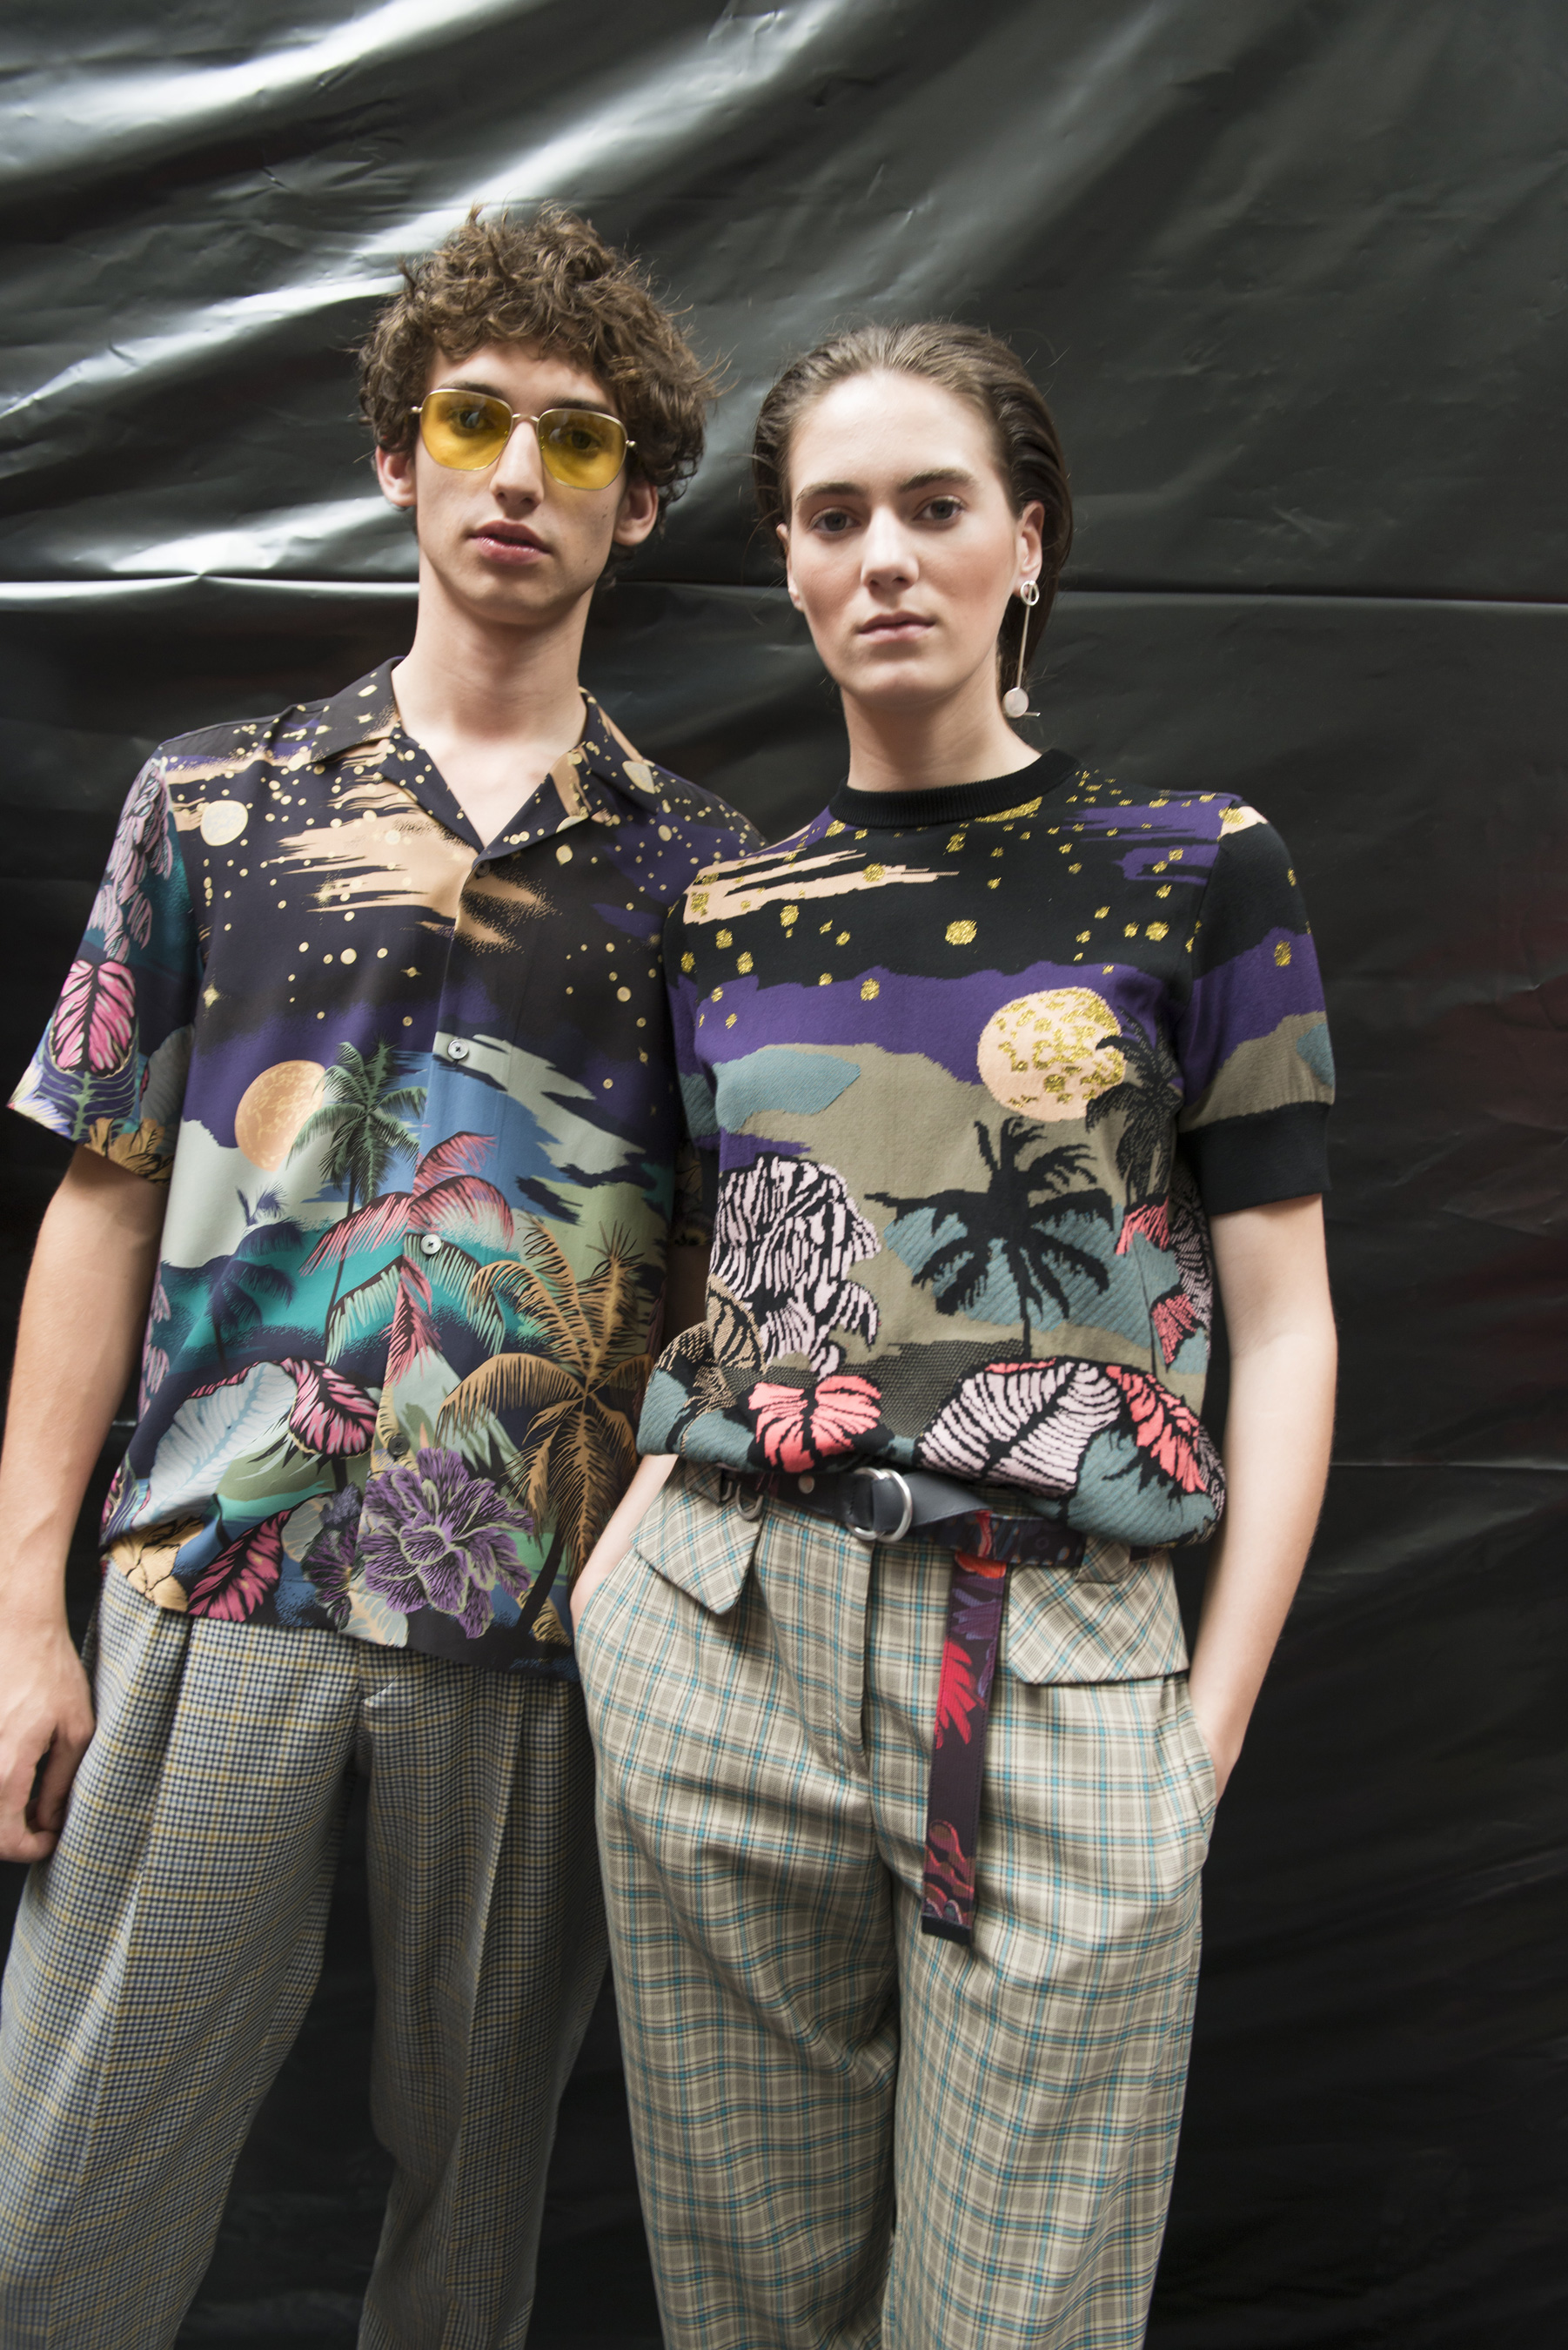 Paul Smith Spring 2018 Men's Fashion Show Backstage - The Impression